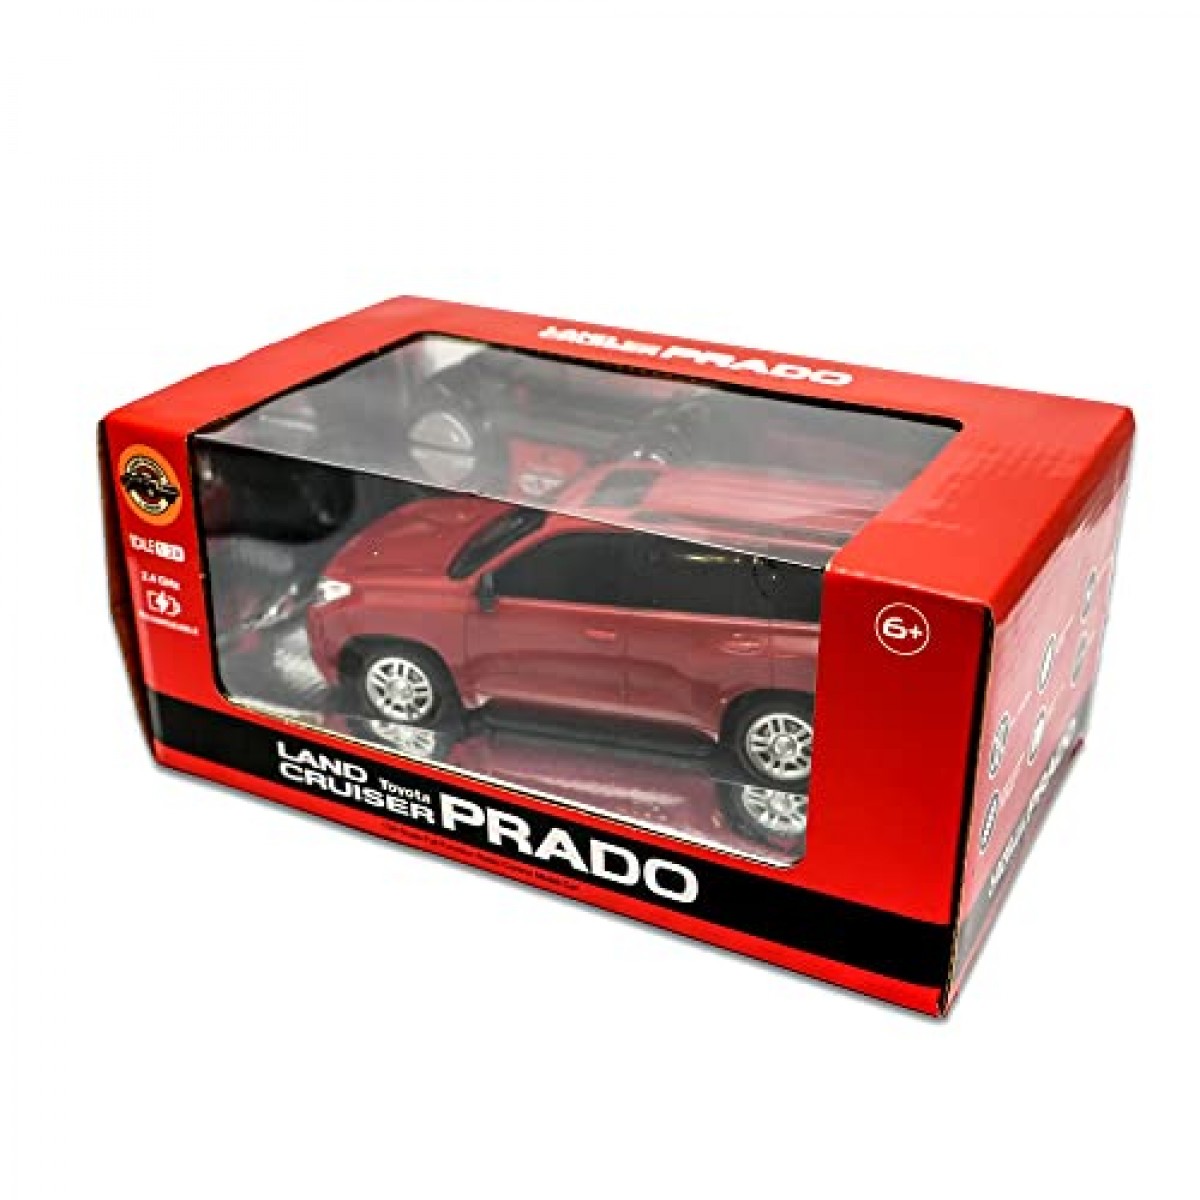 Road Burner Rechargable Remote Control Car for Kids Toyata Prado Full Function, 1:24 Scale Pack of 1, Red, Age 6Y+